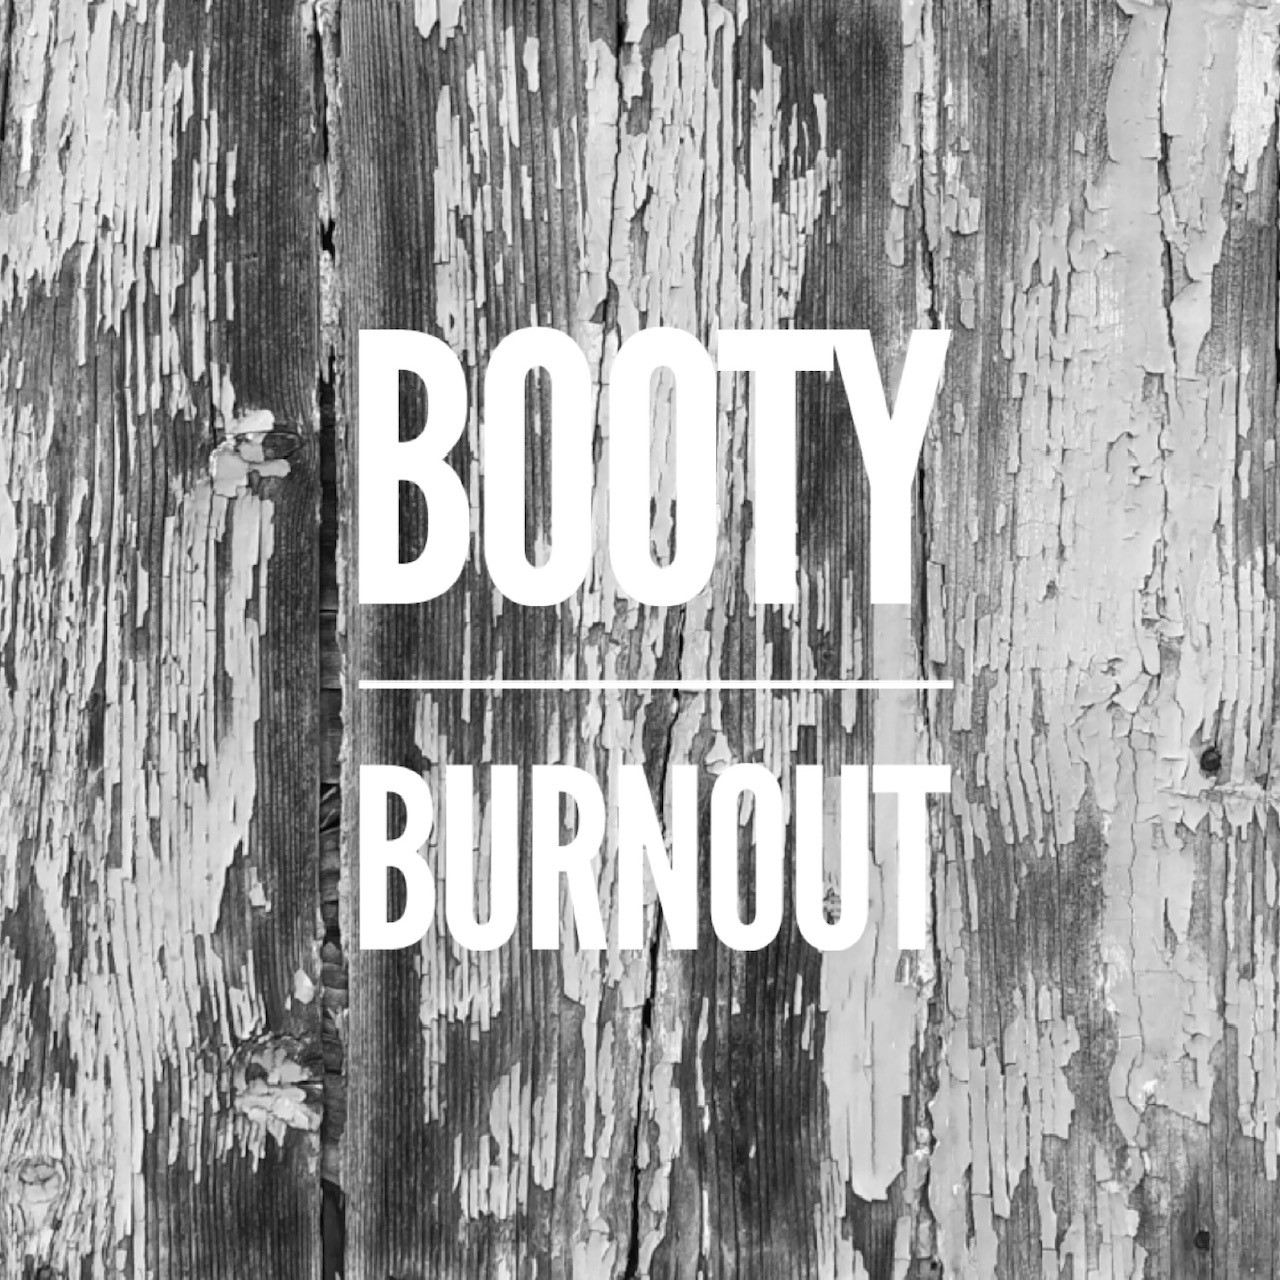 Booty burnout.